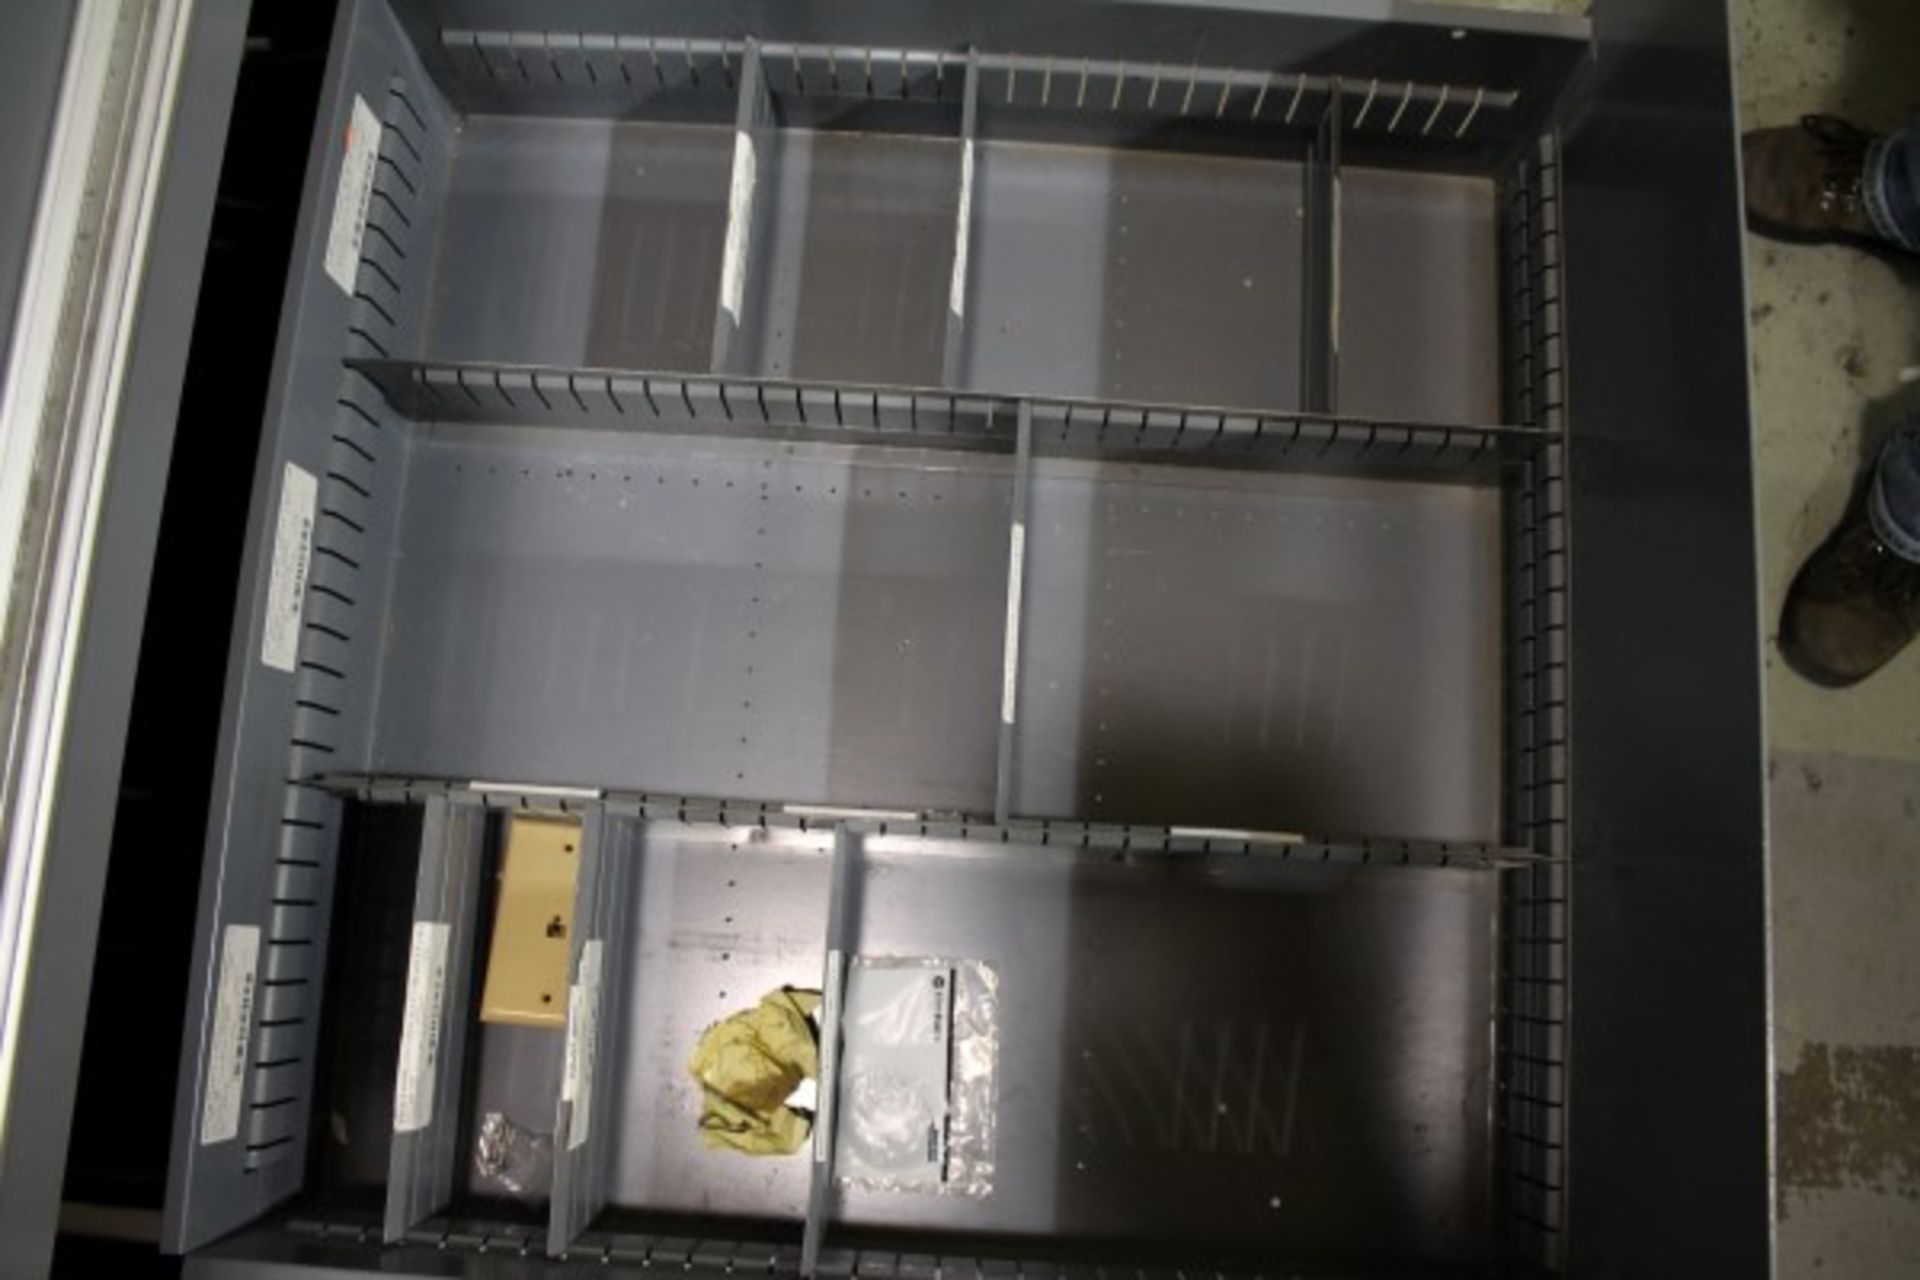 Stanley Vidmar 5 Drawer Storage Cabinet, W/ Contents, Electronic & Electrical Components - Image 5 of 6